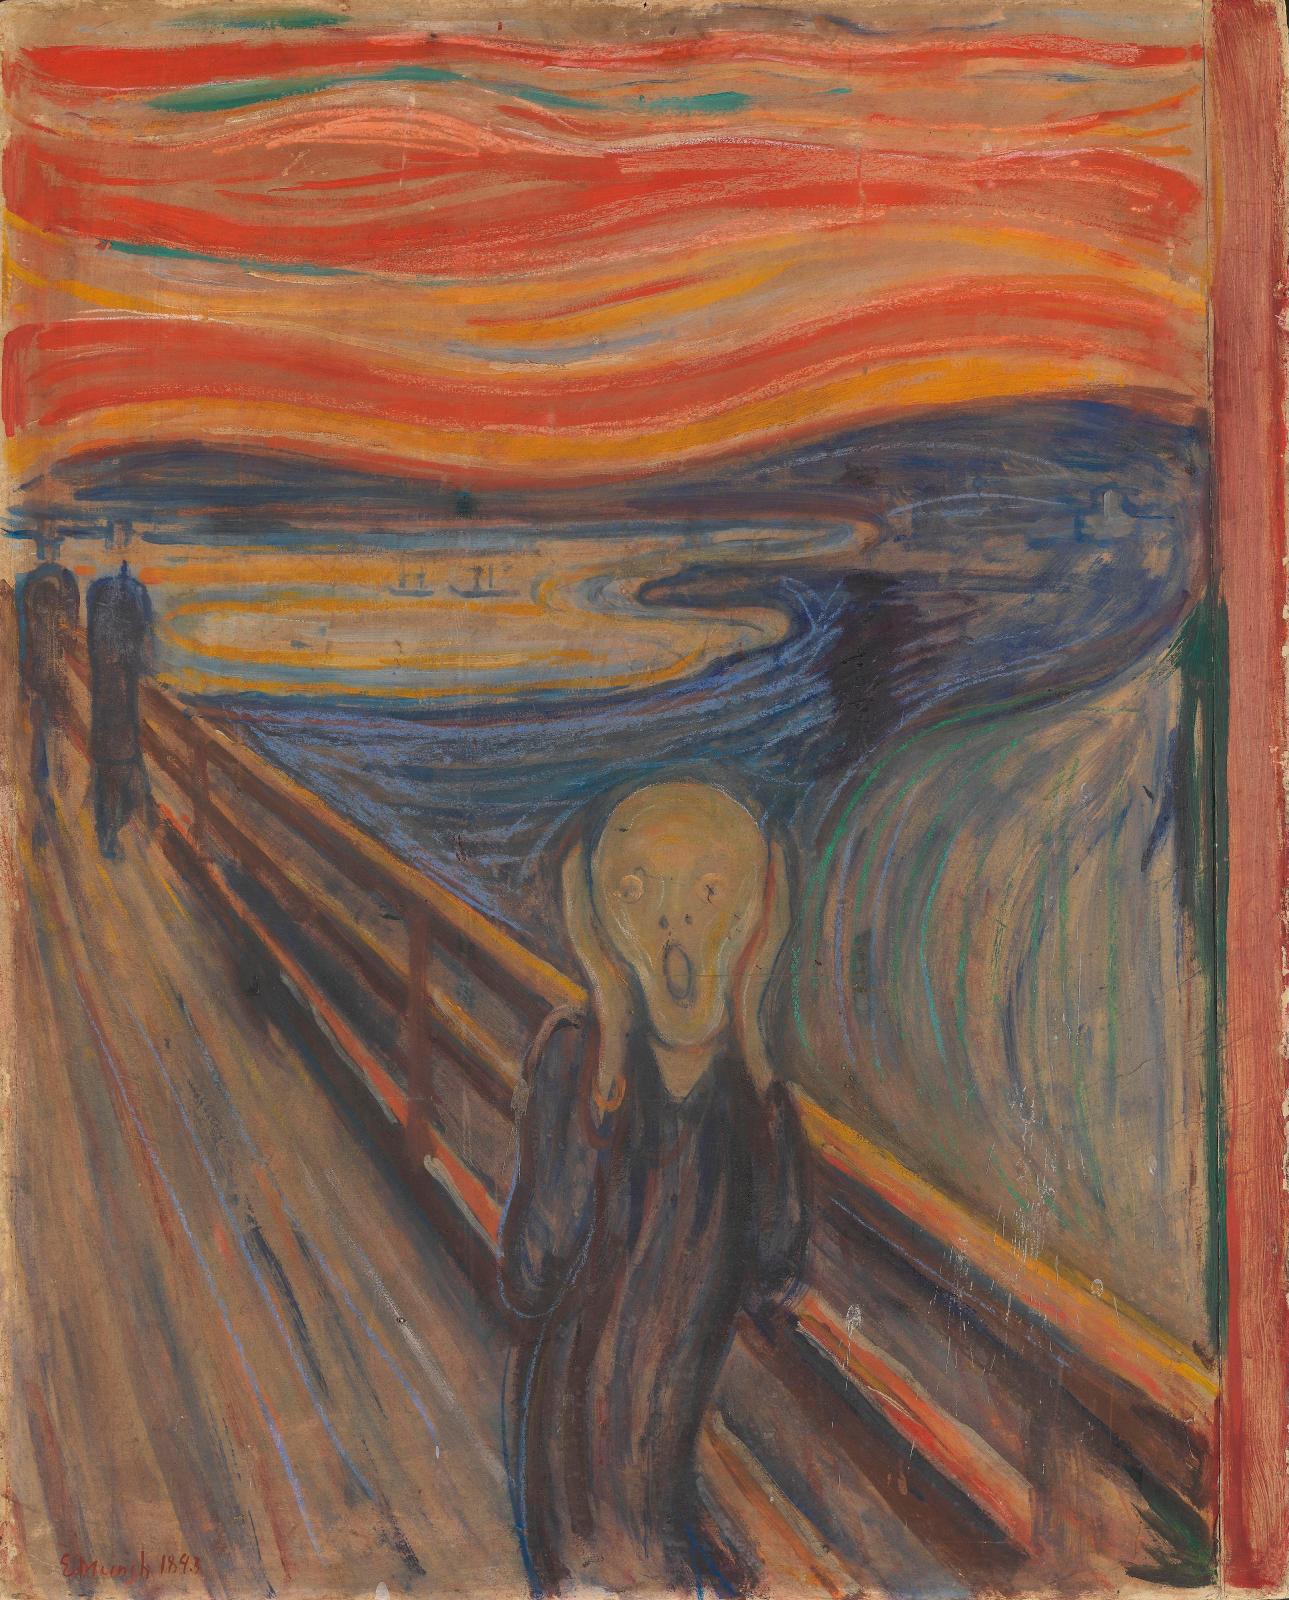 Edvard Munch (1863-1944), The Scream, 1893, paint on cardboard, 73.5 x 91 cm/28.94 x 35.82 in, bequest of Olaf Shou in 1910.Photo Borre Ho